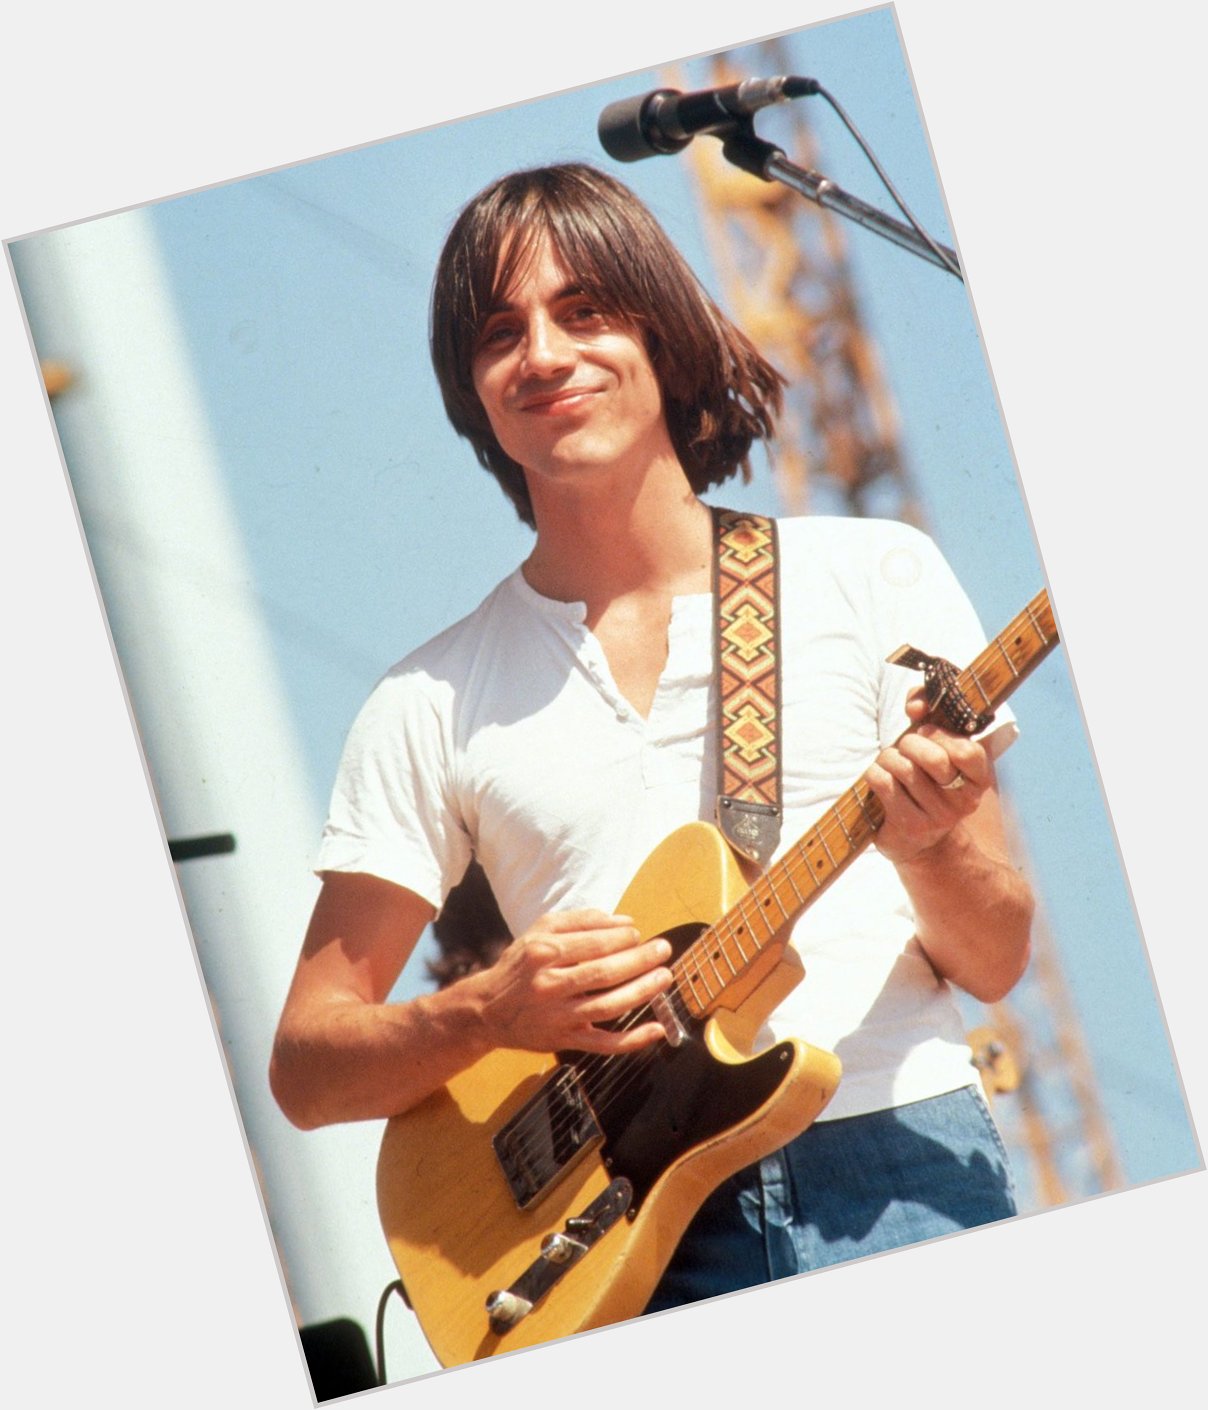 Happy Birthday to singer, songwriter and musician Jackson Browne born on October 9, 1948 